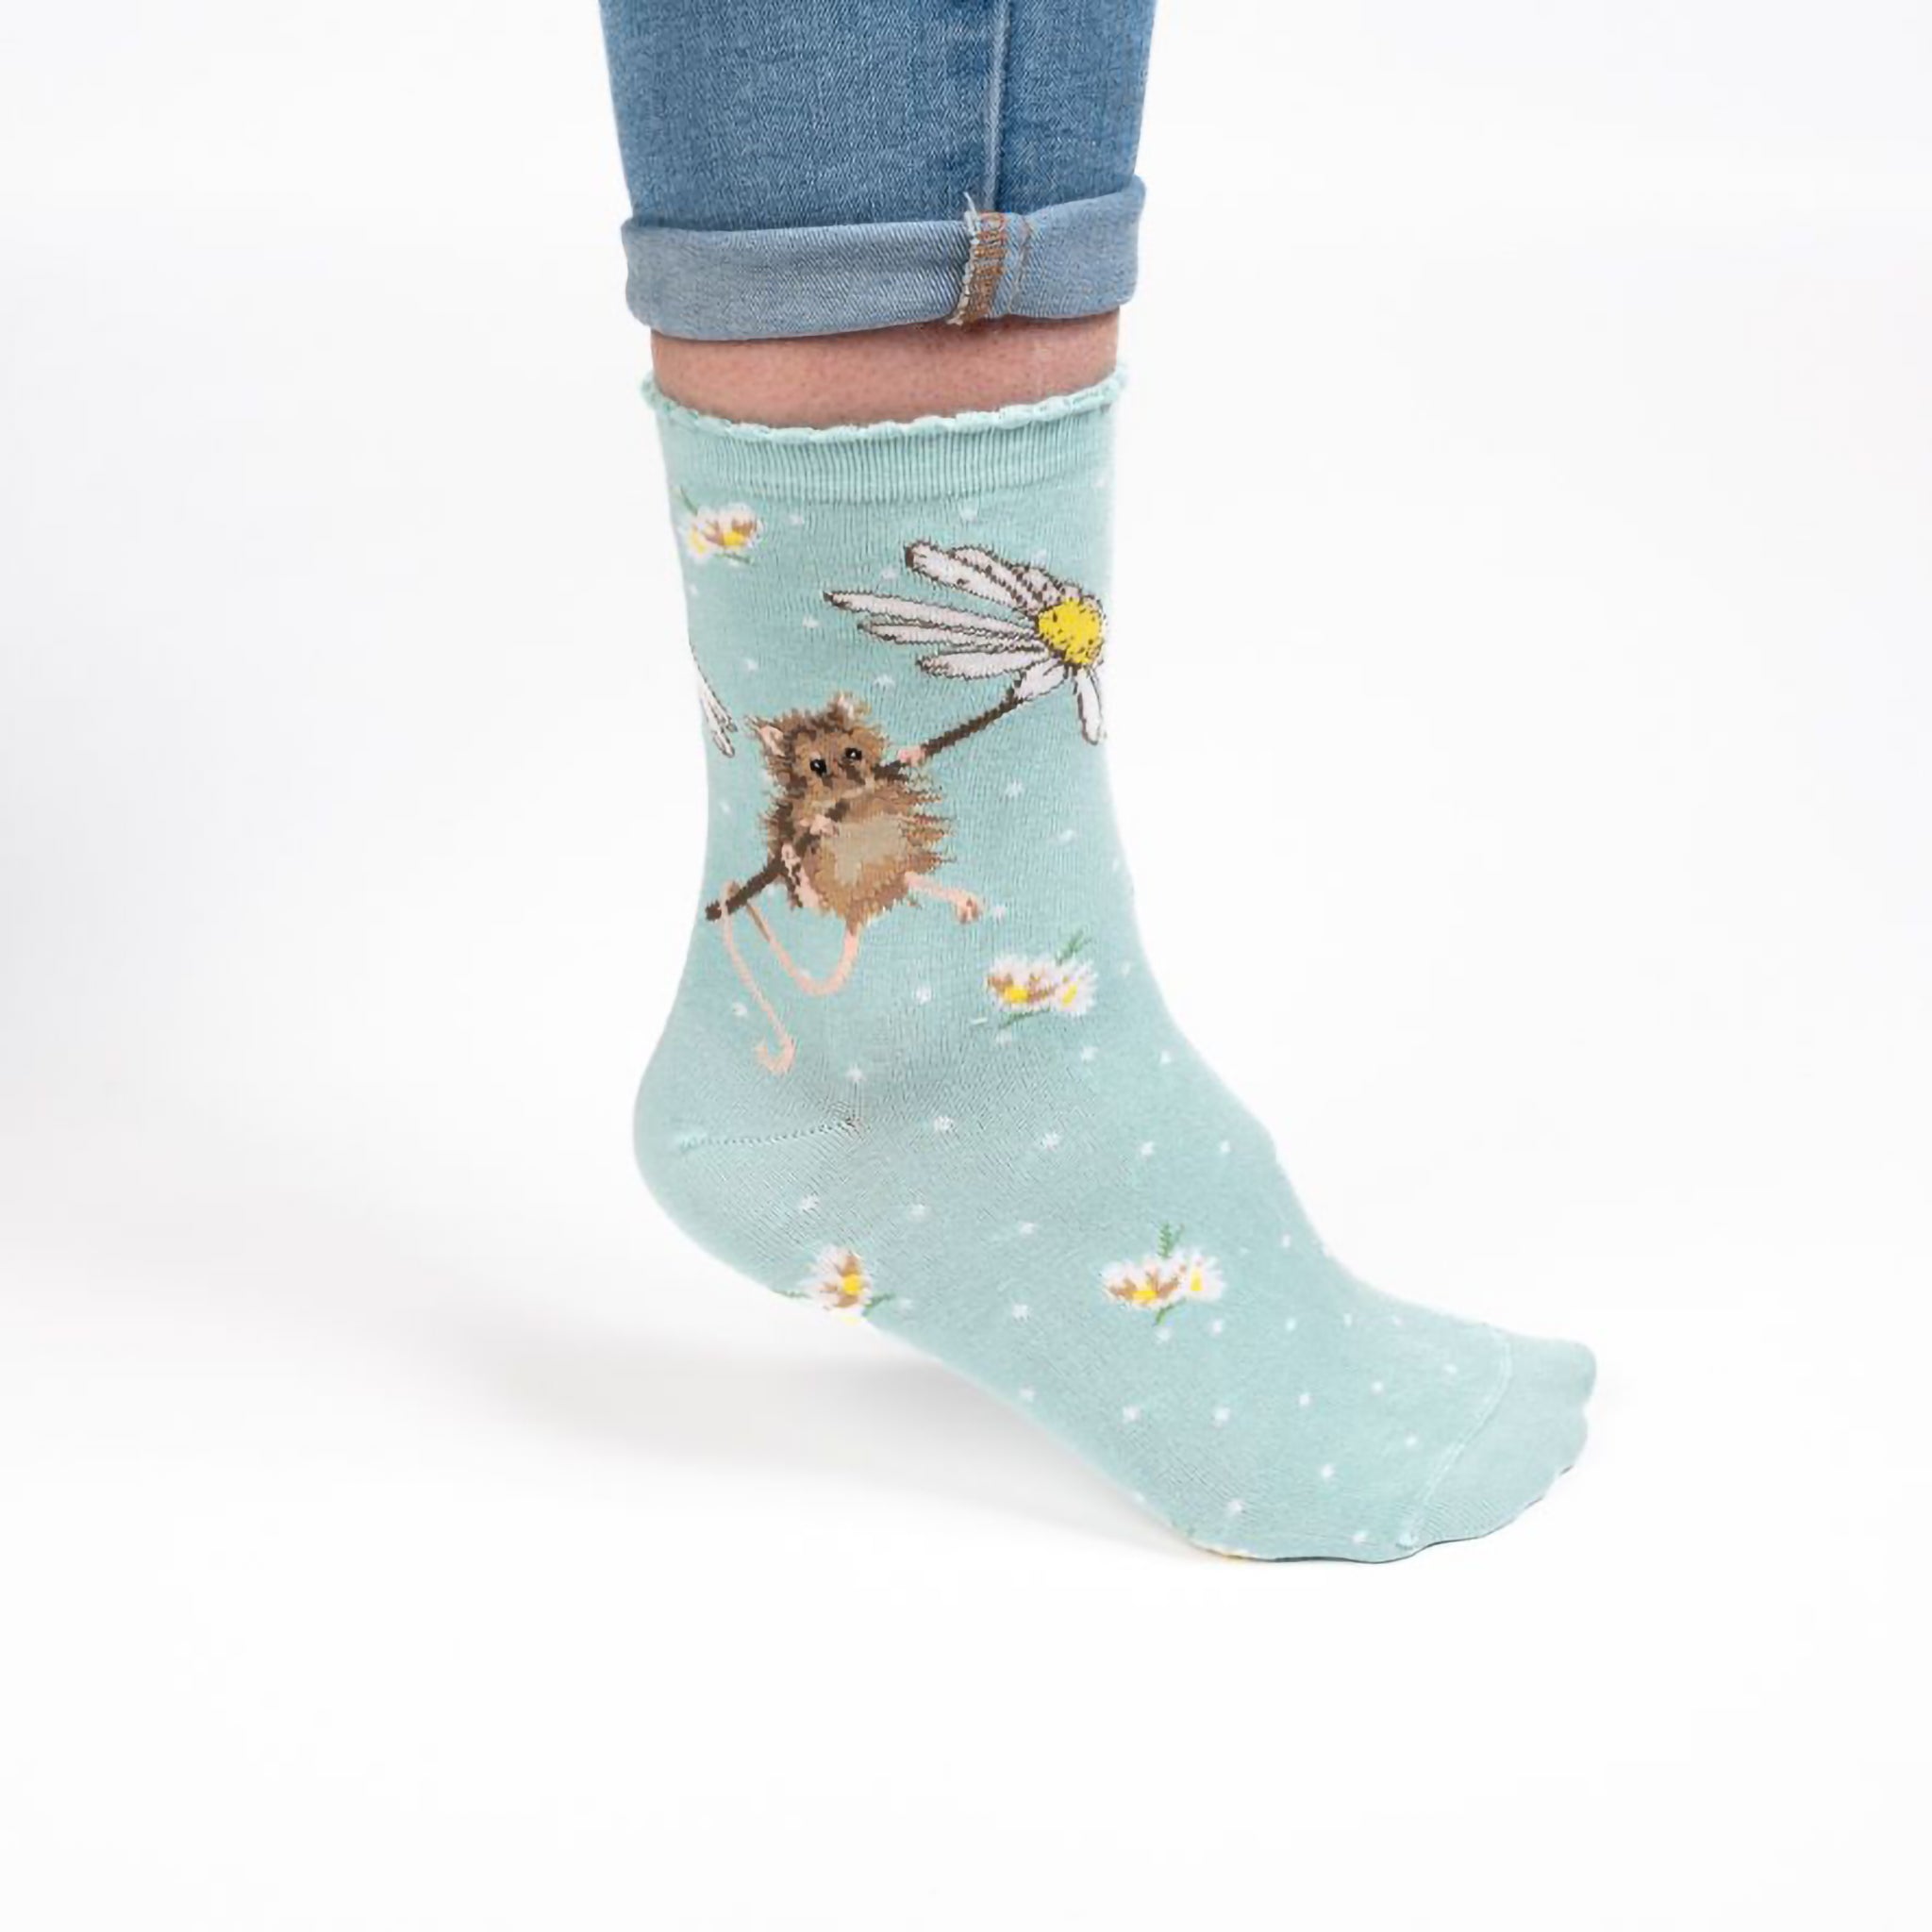 Model wearing a pair of light blue socks with a mouse holding a daisy picture and white polka dots